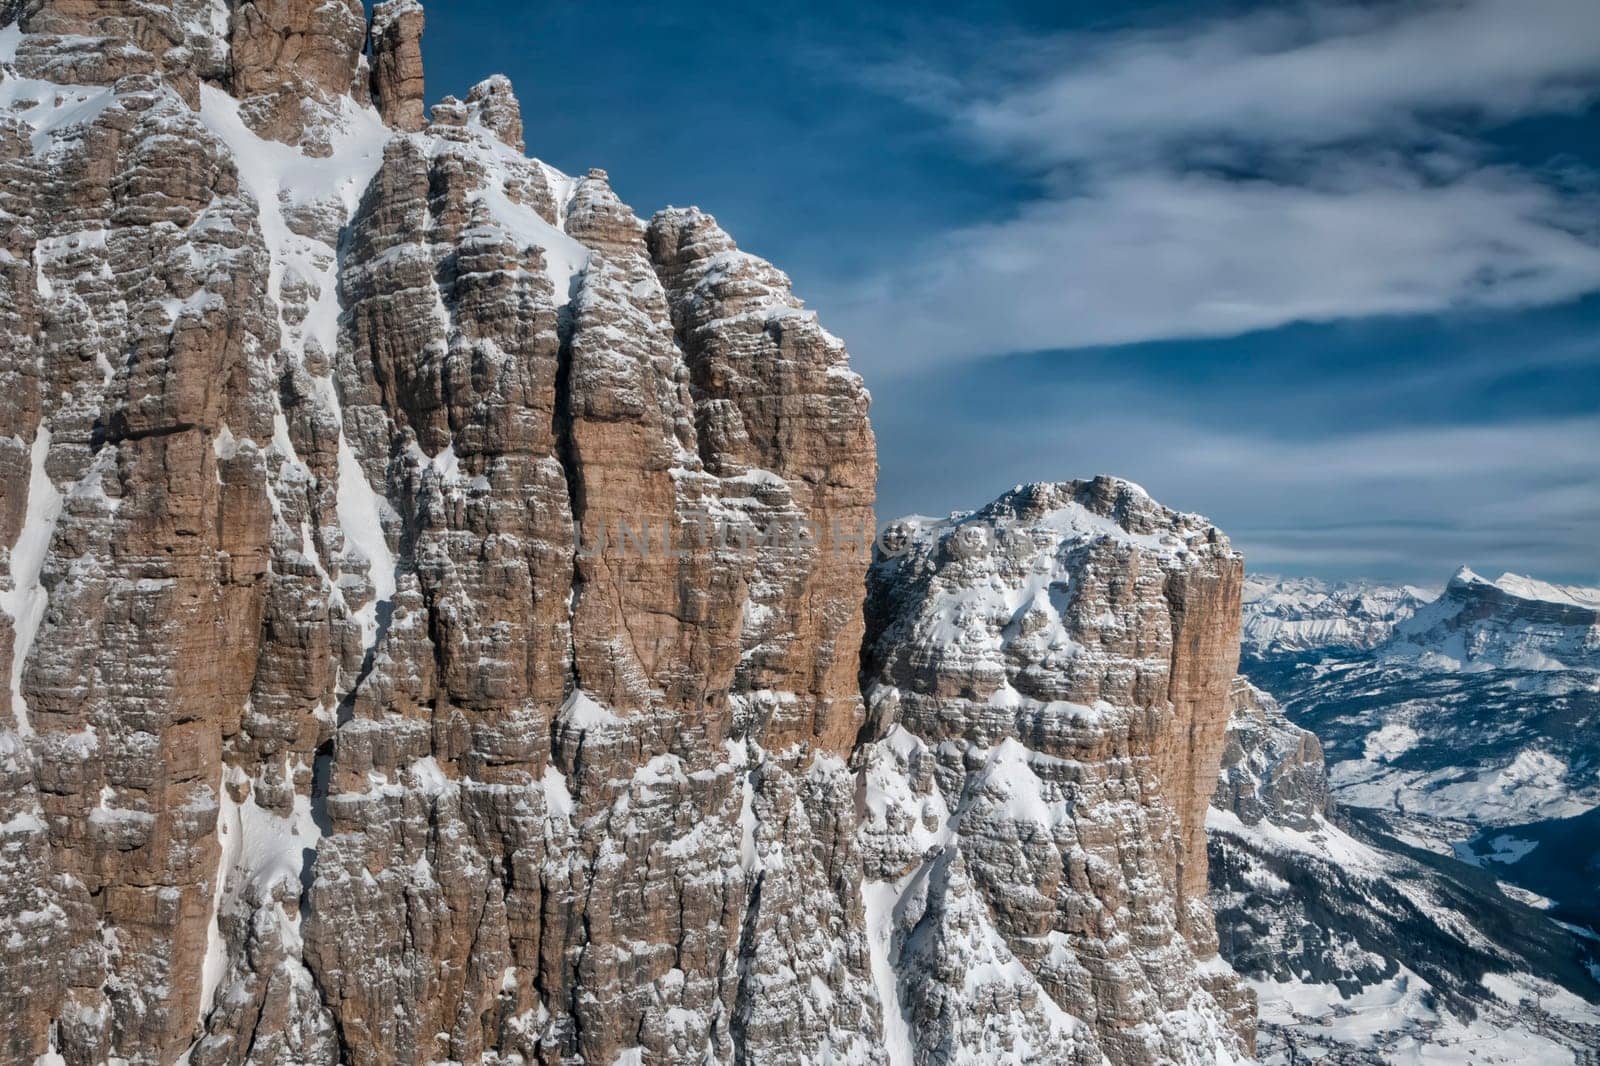 Dolomites aerial sky view in winter